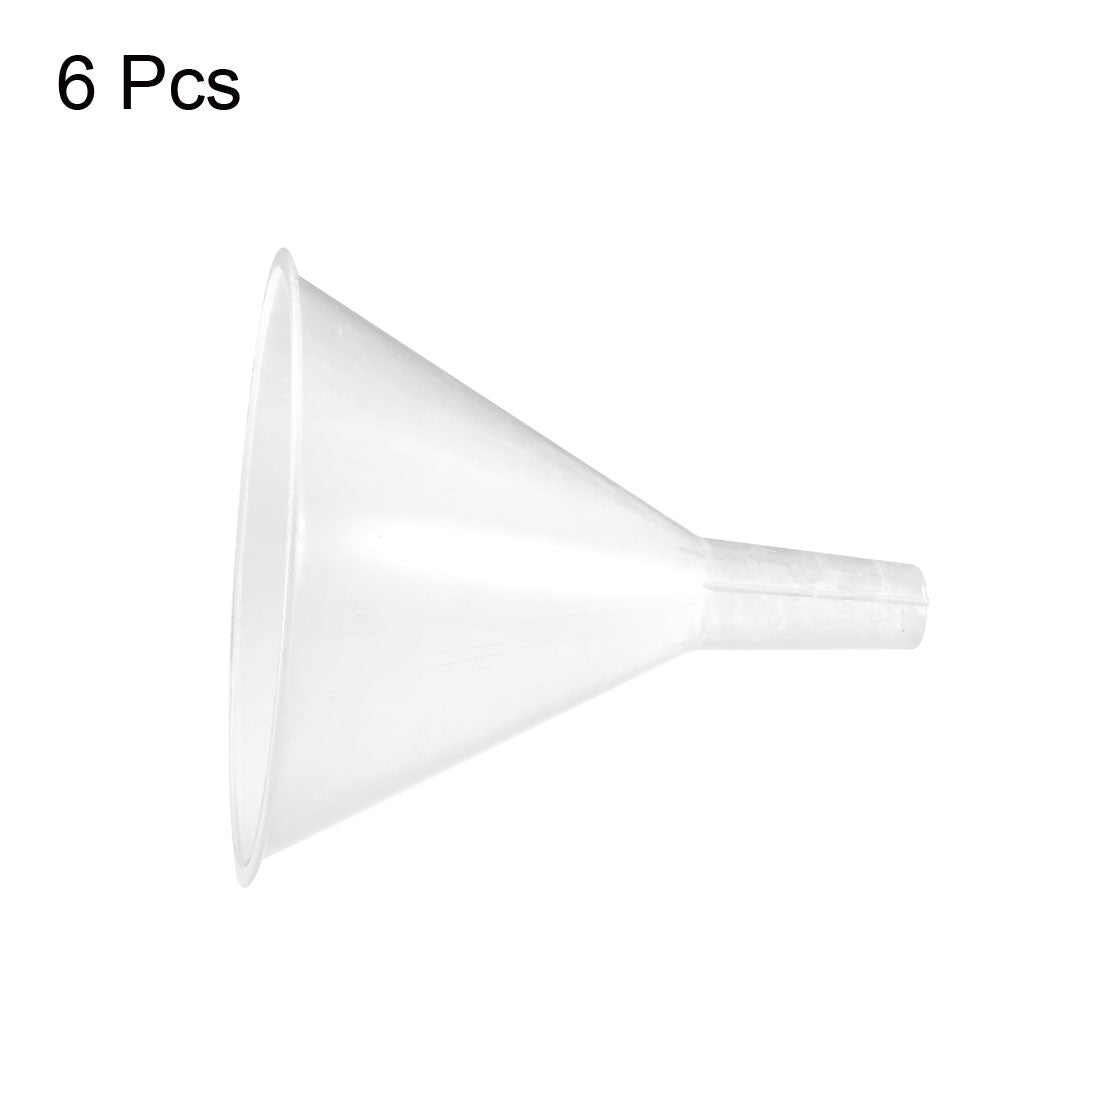 uxcell Uxcell 6pcs Clear Plastic Funnels 4.5 inch Dia. Mouth Transfer Filling Tool for Bottle Filling Perfumes Essential Oils Laboratory Chemicals